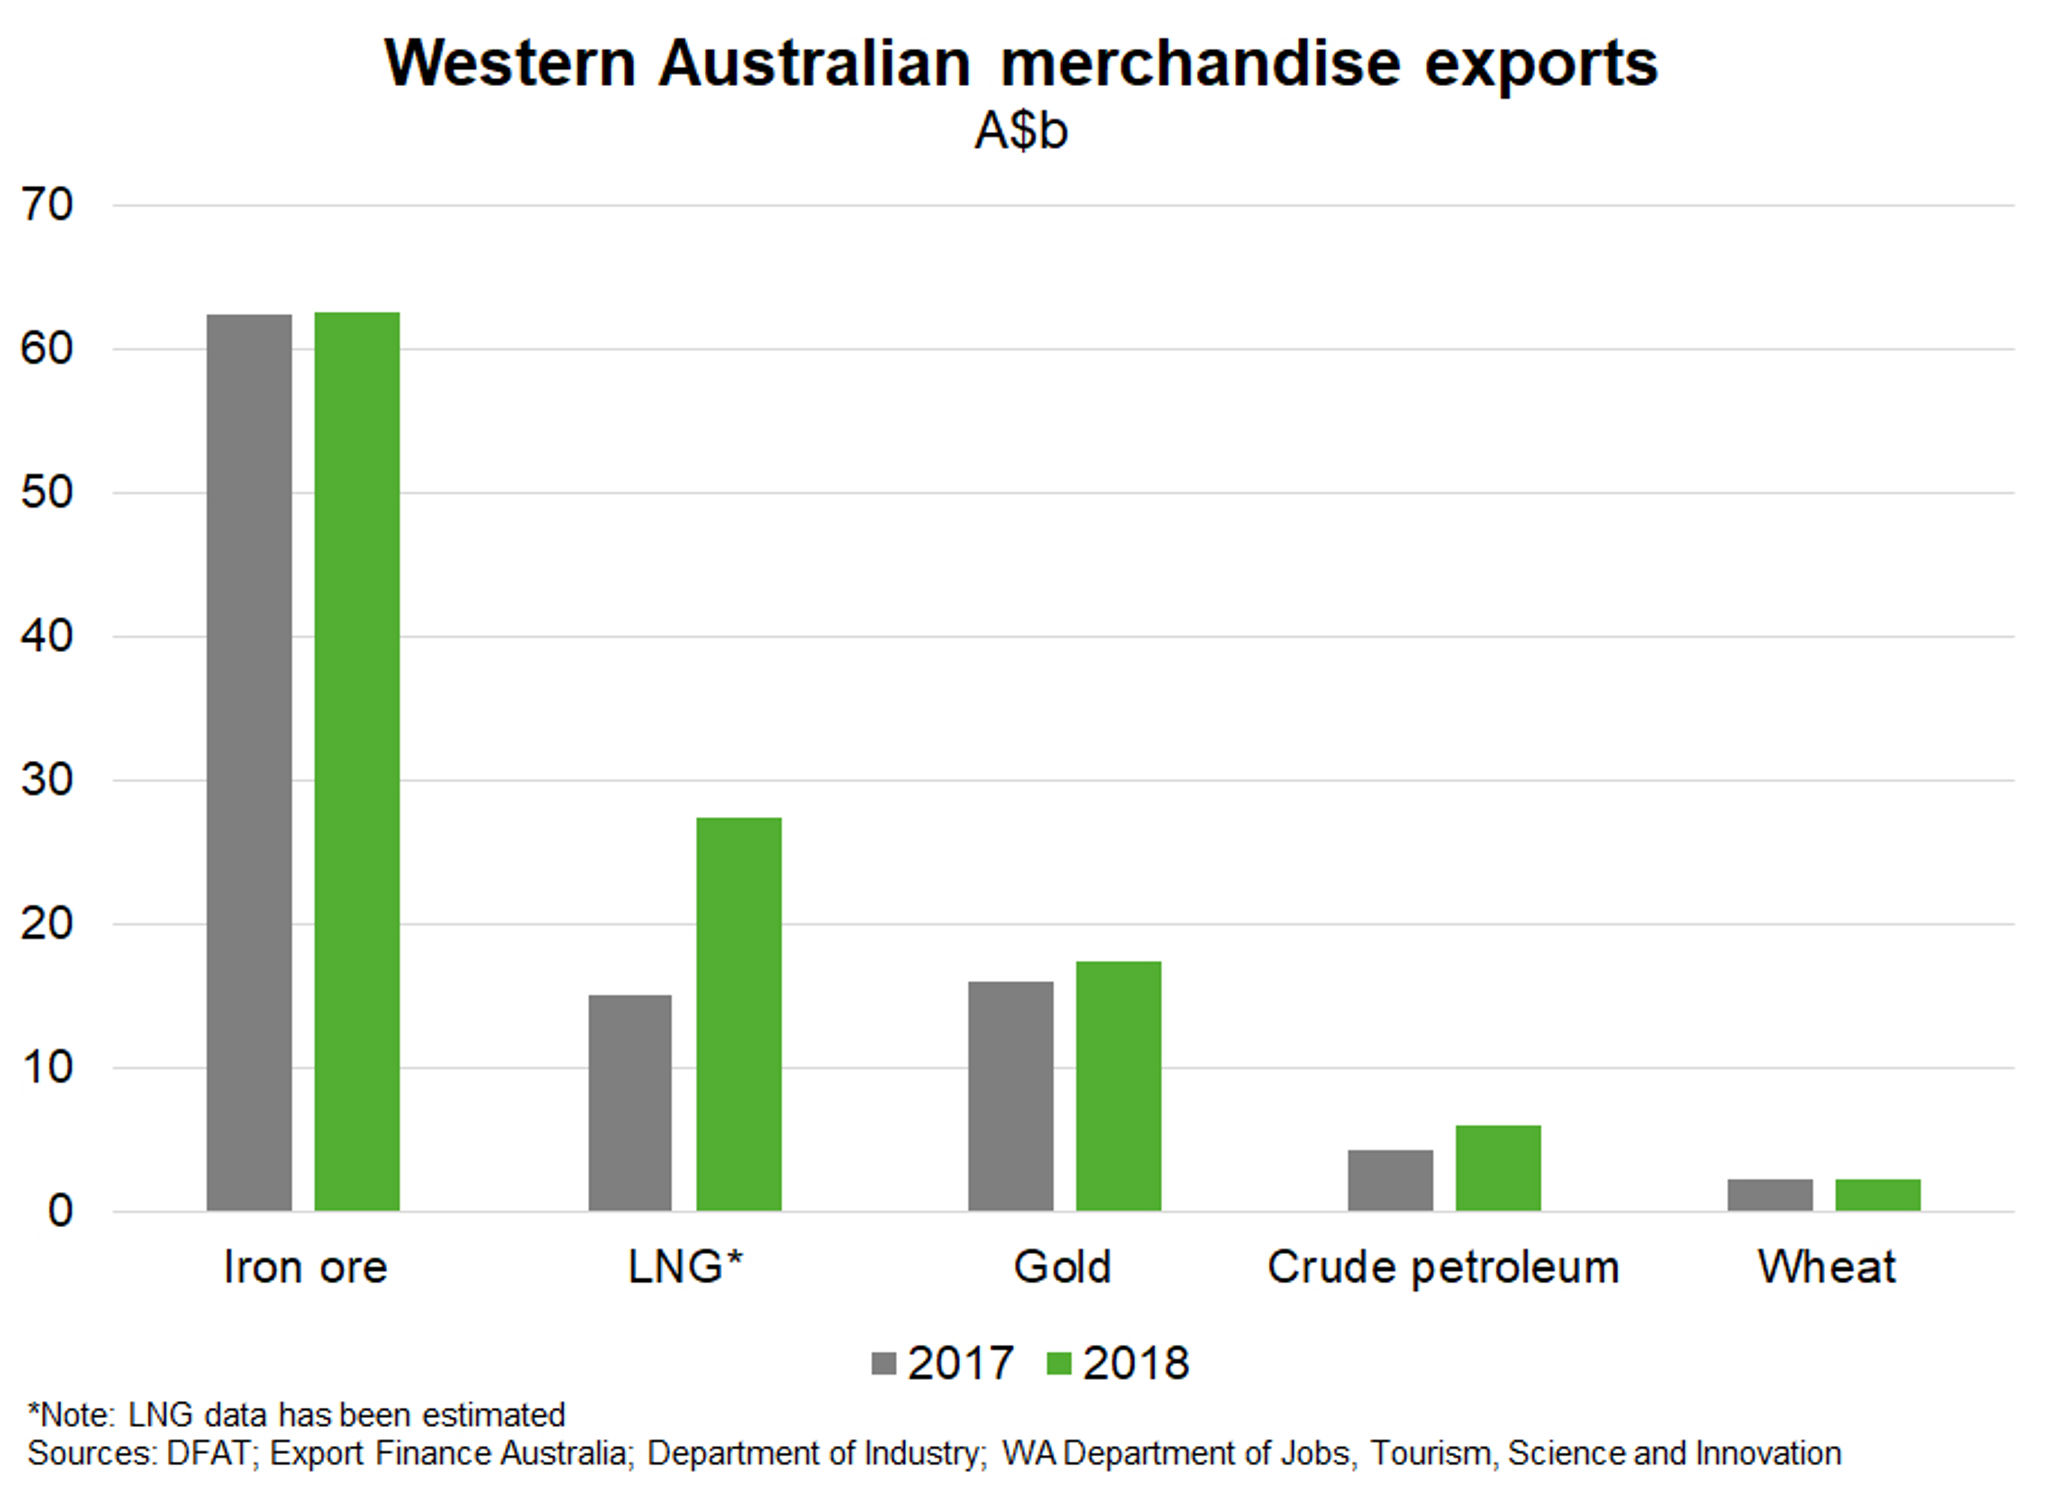 Western Australia—Iron ore exports stagnate with LNG taking the lead